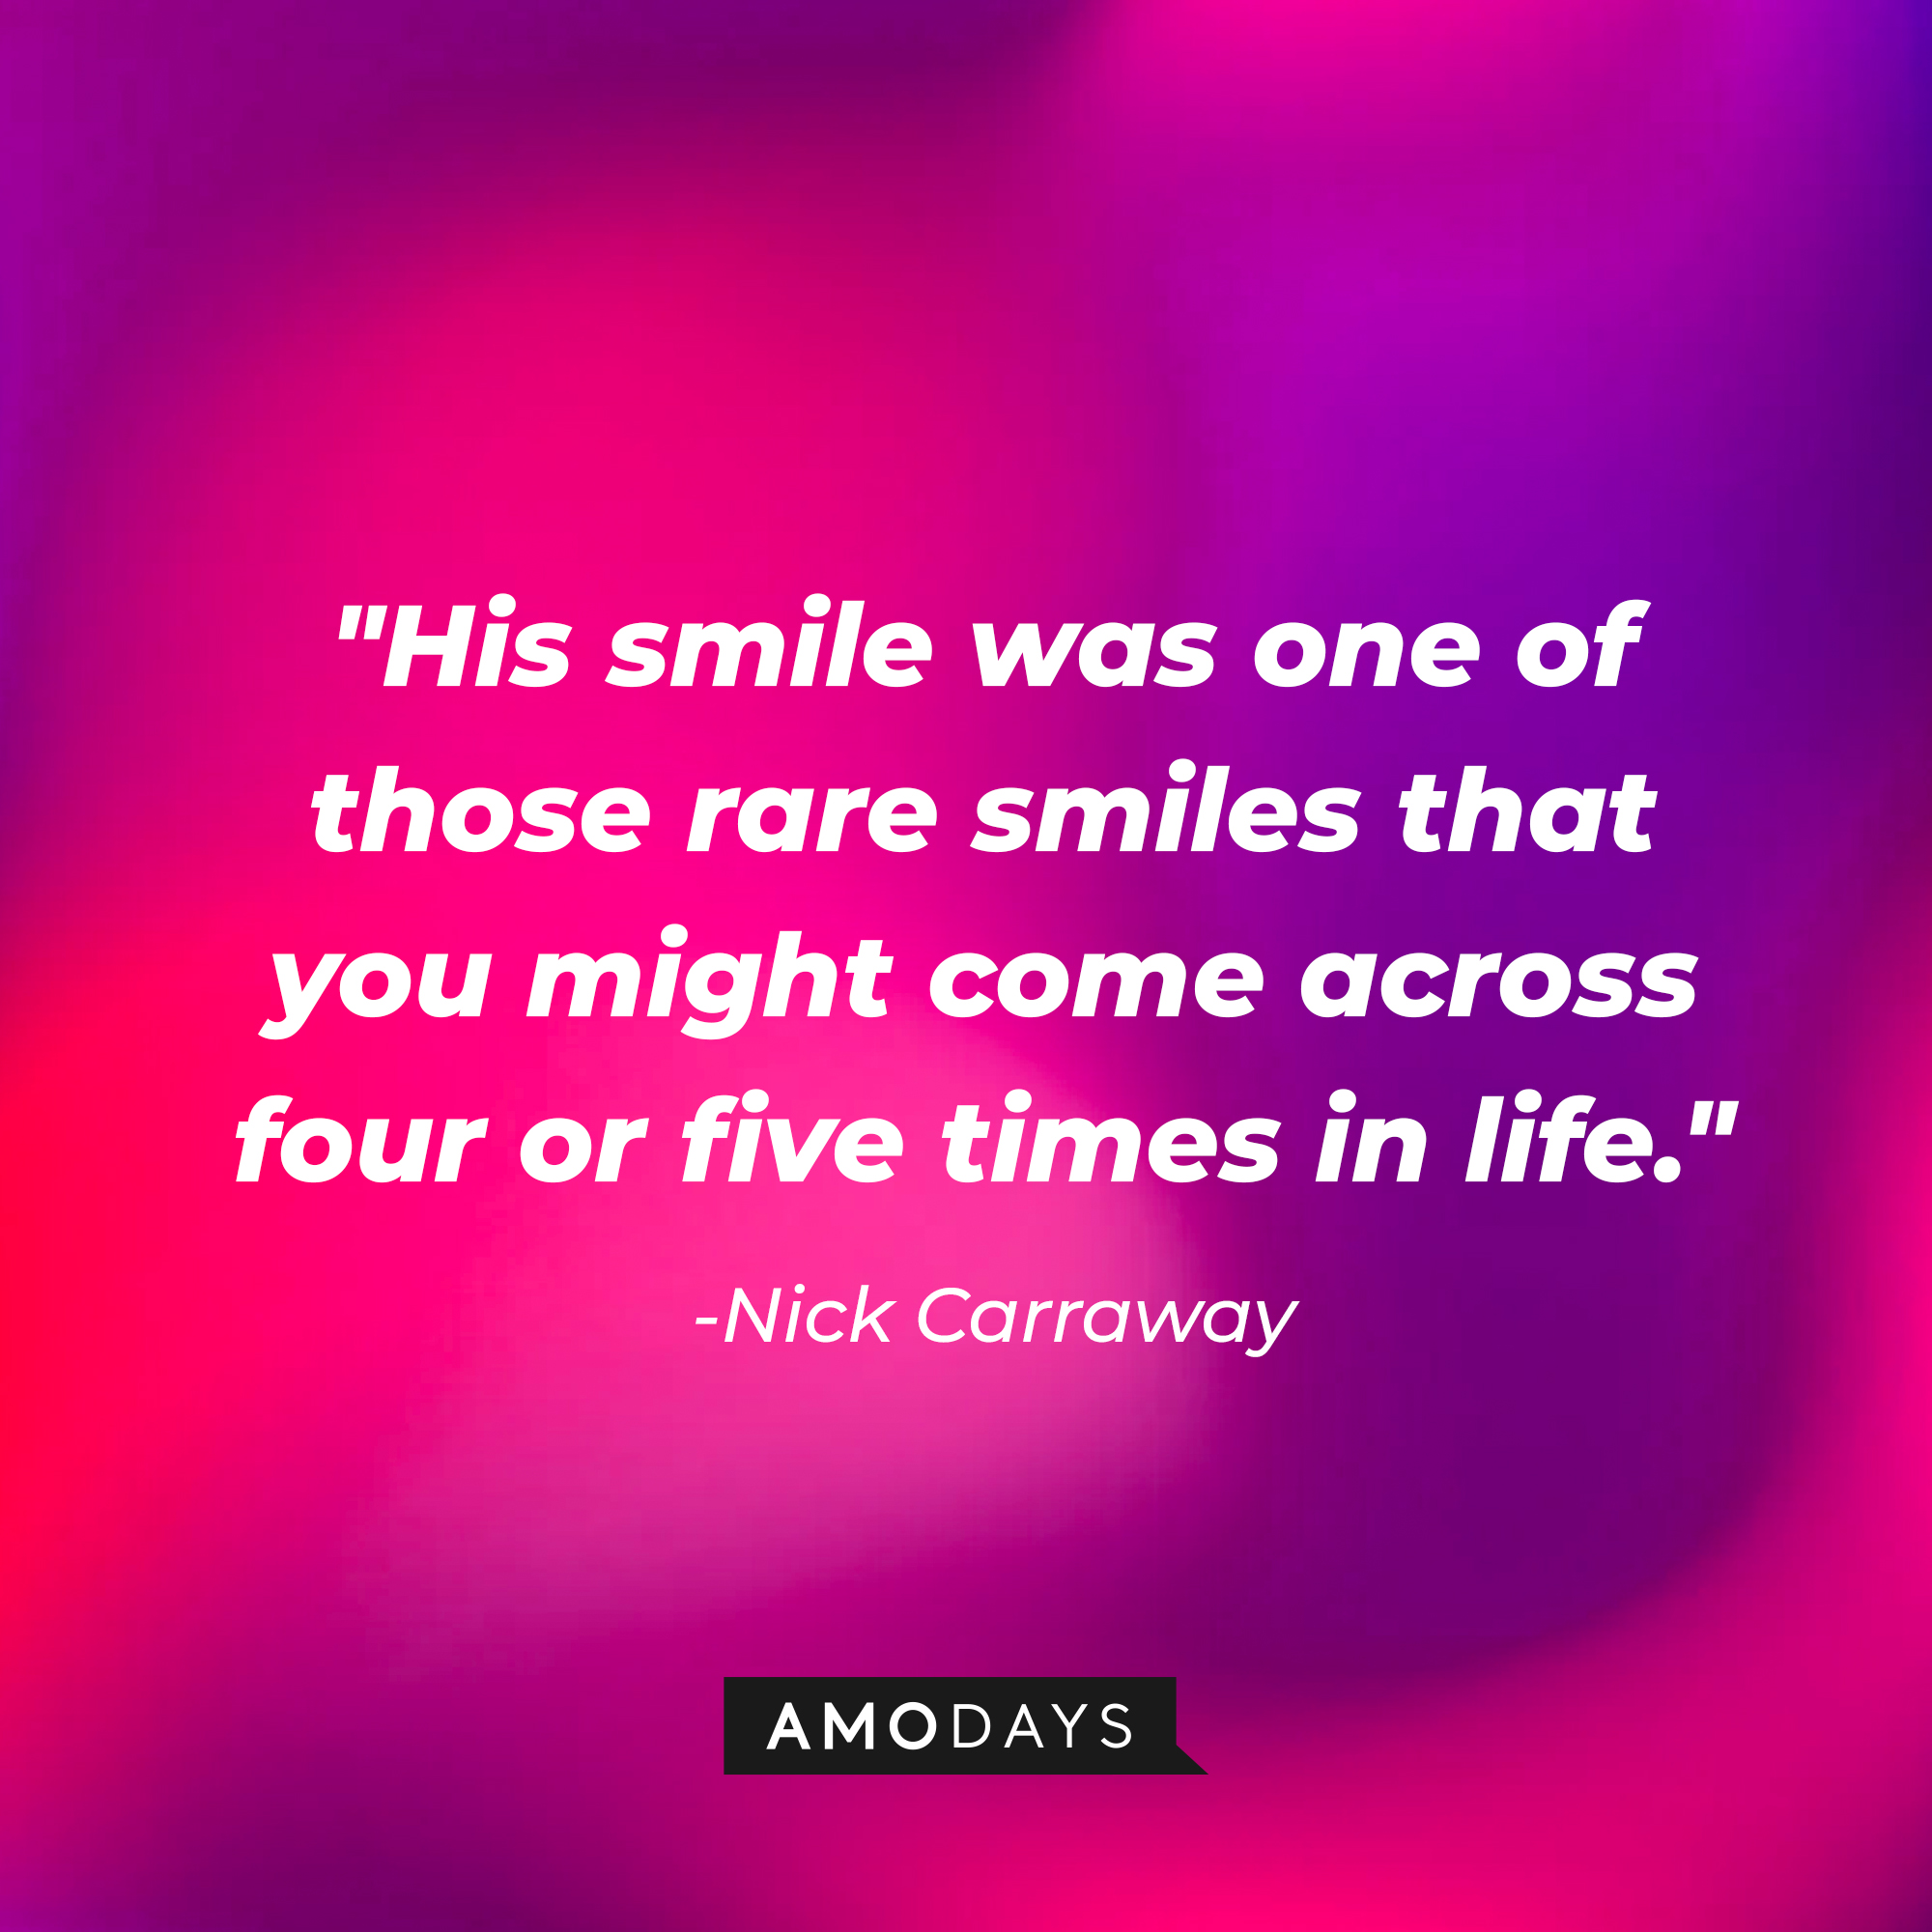 Nick Carraway's quote, "His smile was one of those rare smiles that you might come across four or five times in life." | Source: Amodays